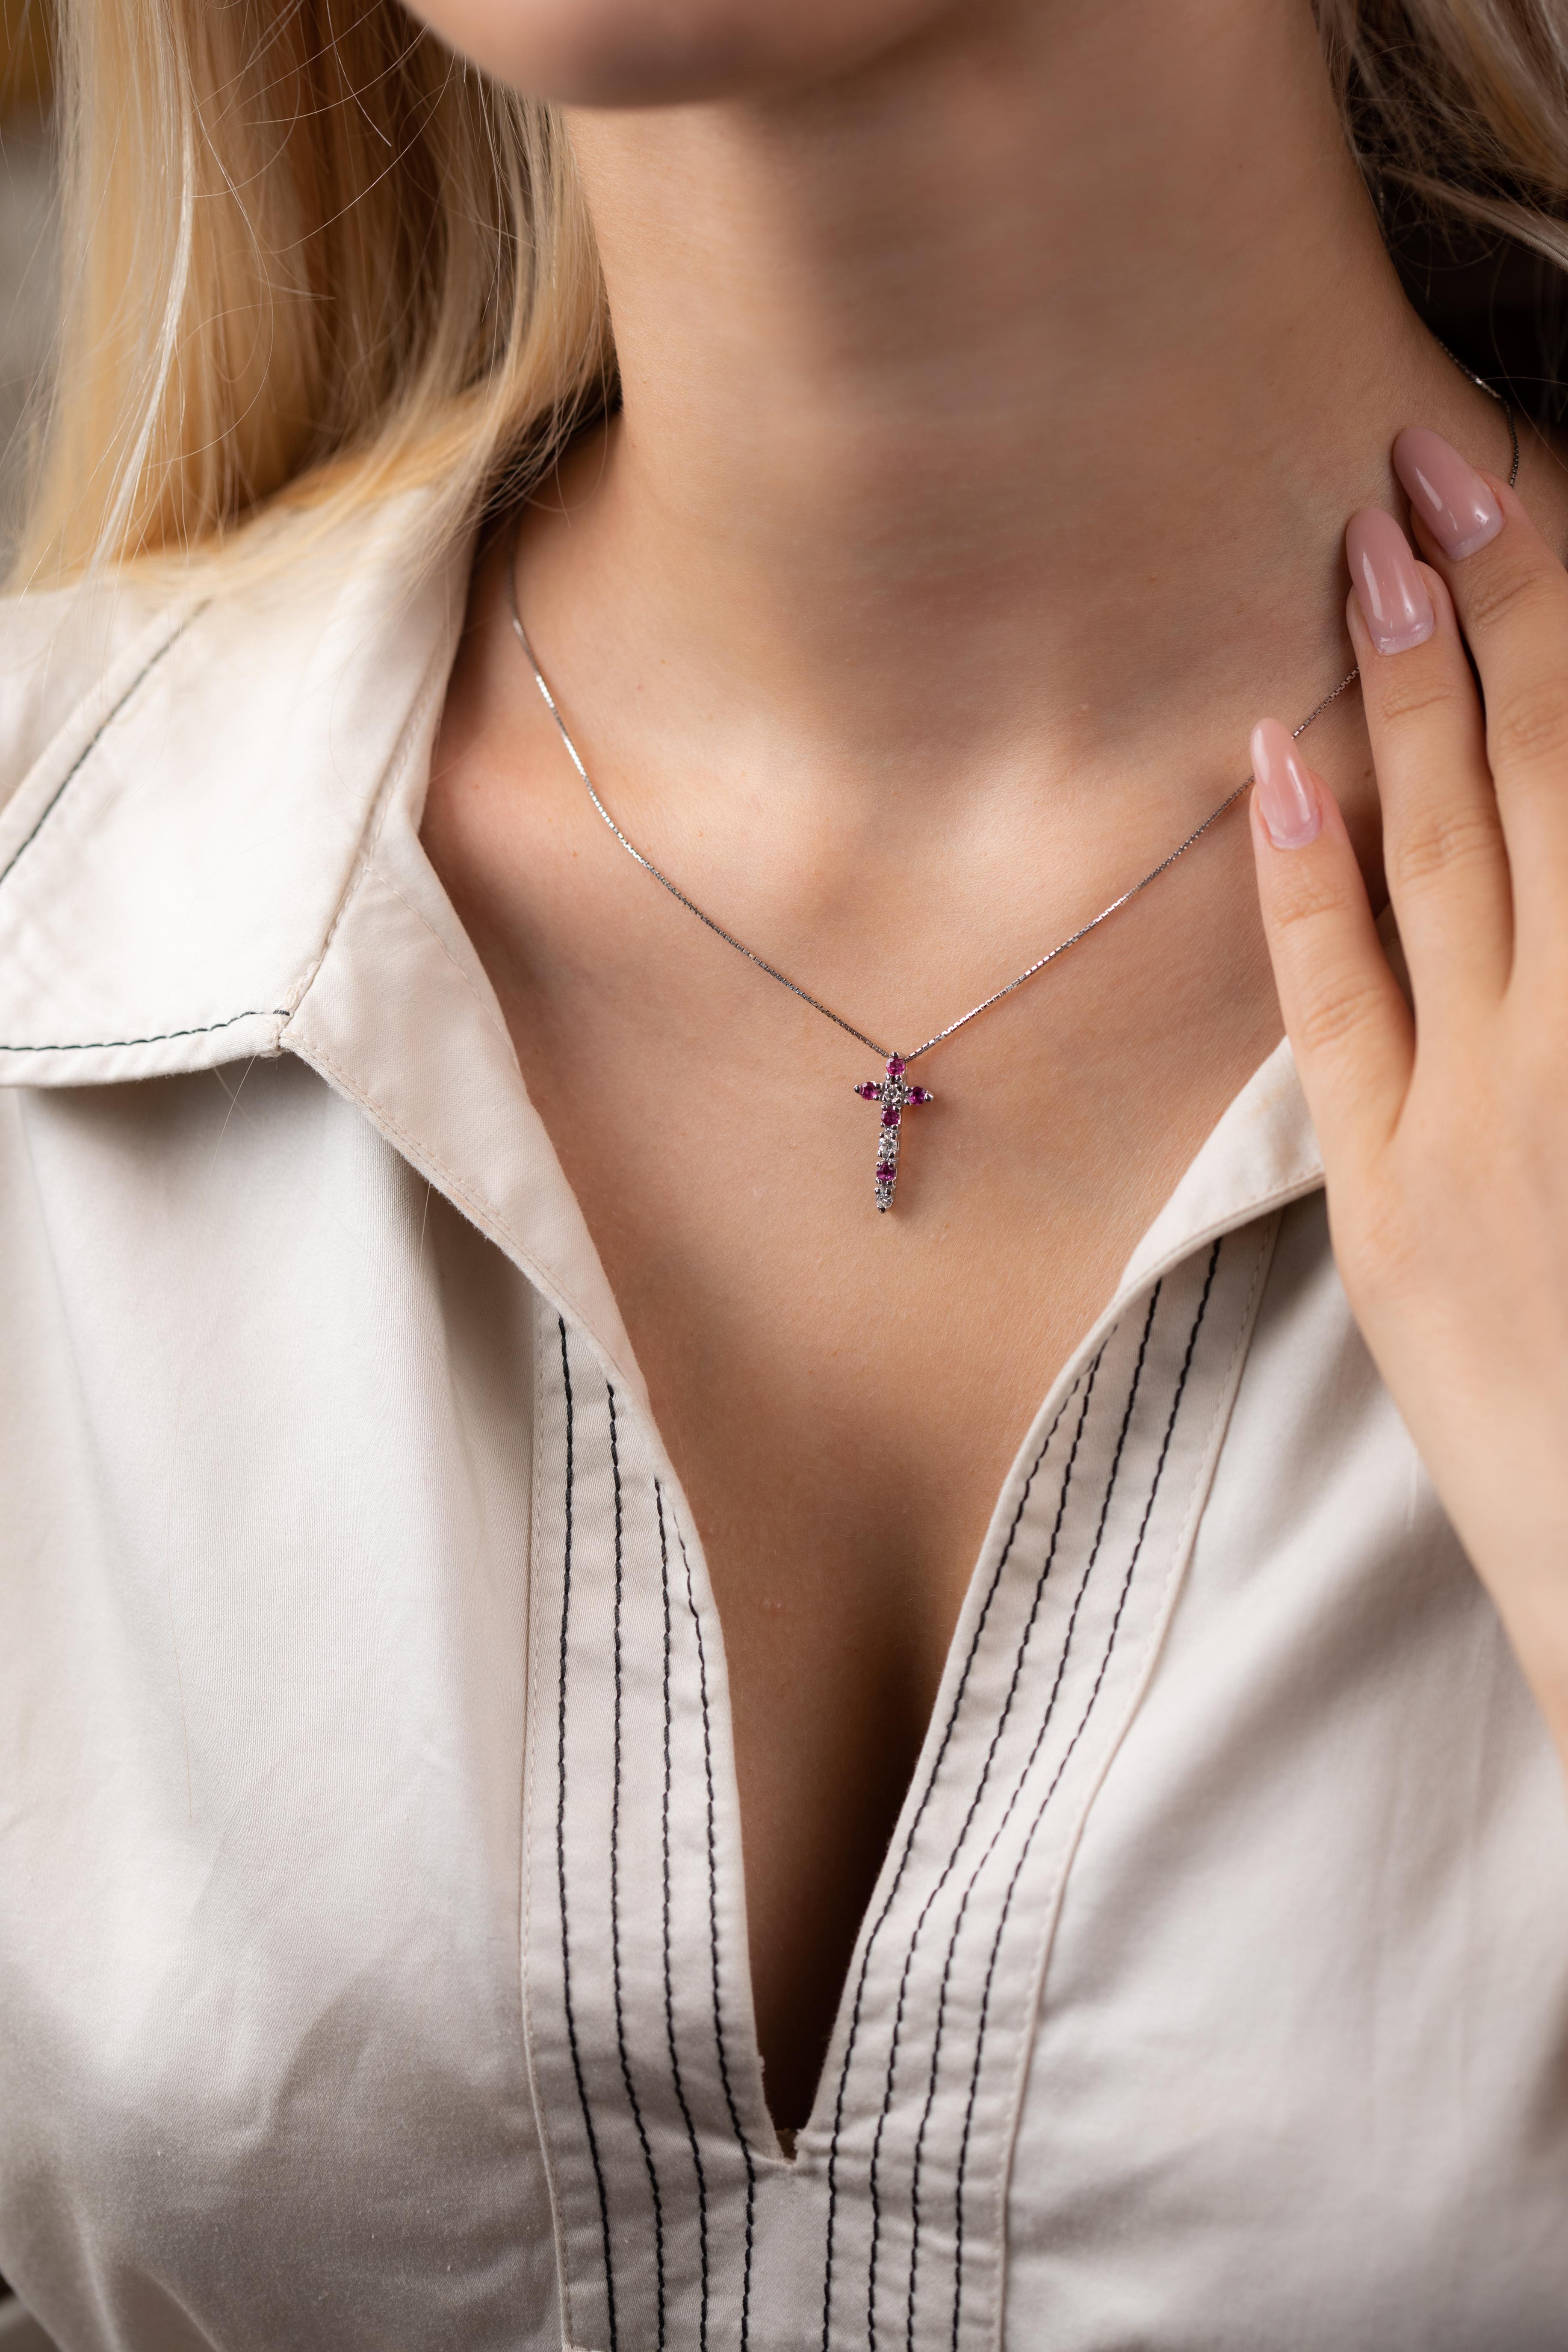 18K white gold elegant cross pendant is from Timeless Collection.  The cross is decorated by natural white diamonds in total of 0.15 Carat and natural rubies in total of 9.5 Carat. Total metal weight is 4.0 gr.  The pendant is 2cm long. The chain is